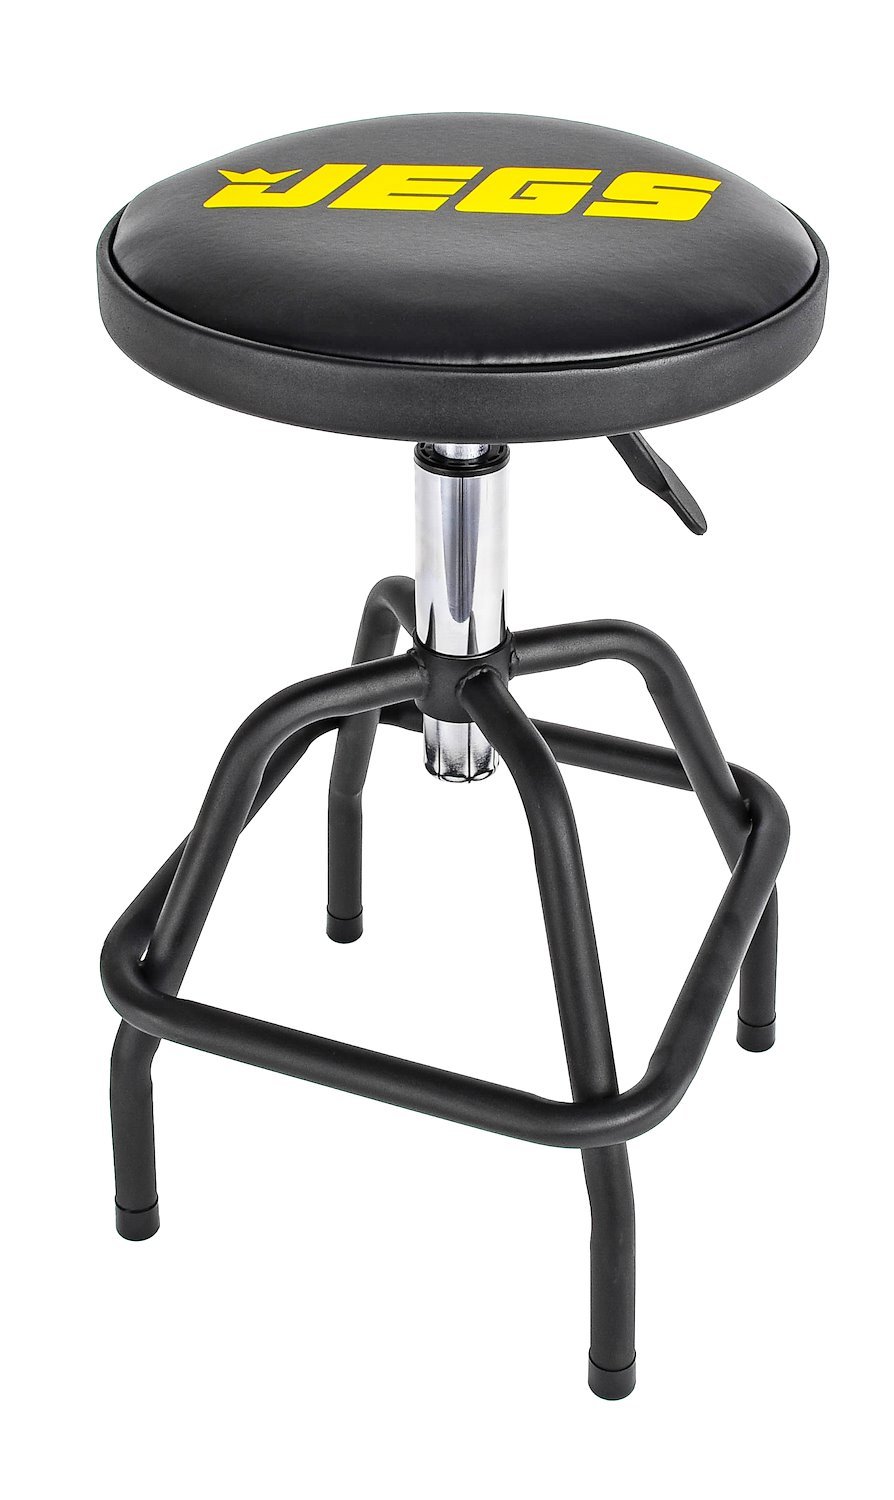 Shop Stool with Swivel Seat [Adjustable, 300 lb. Capacity]